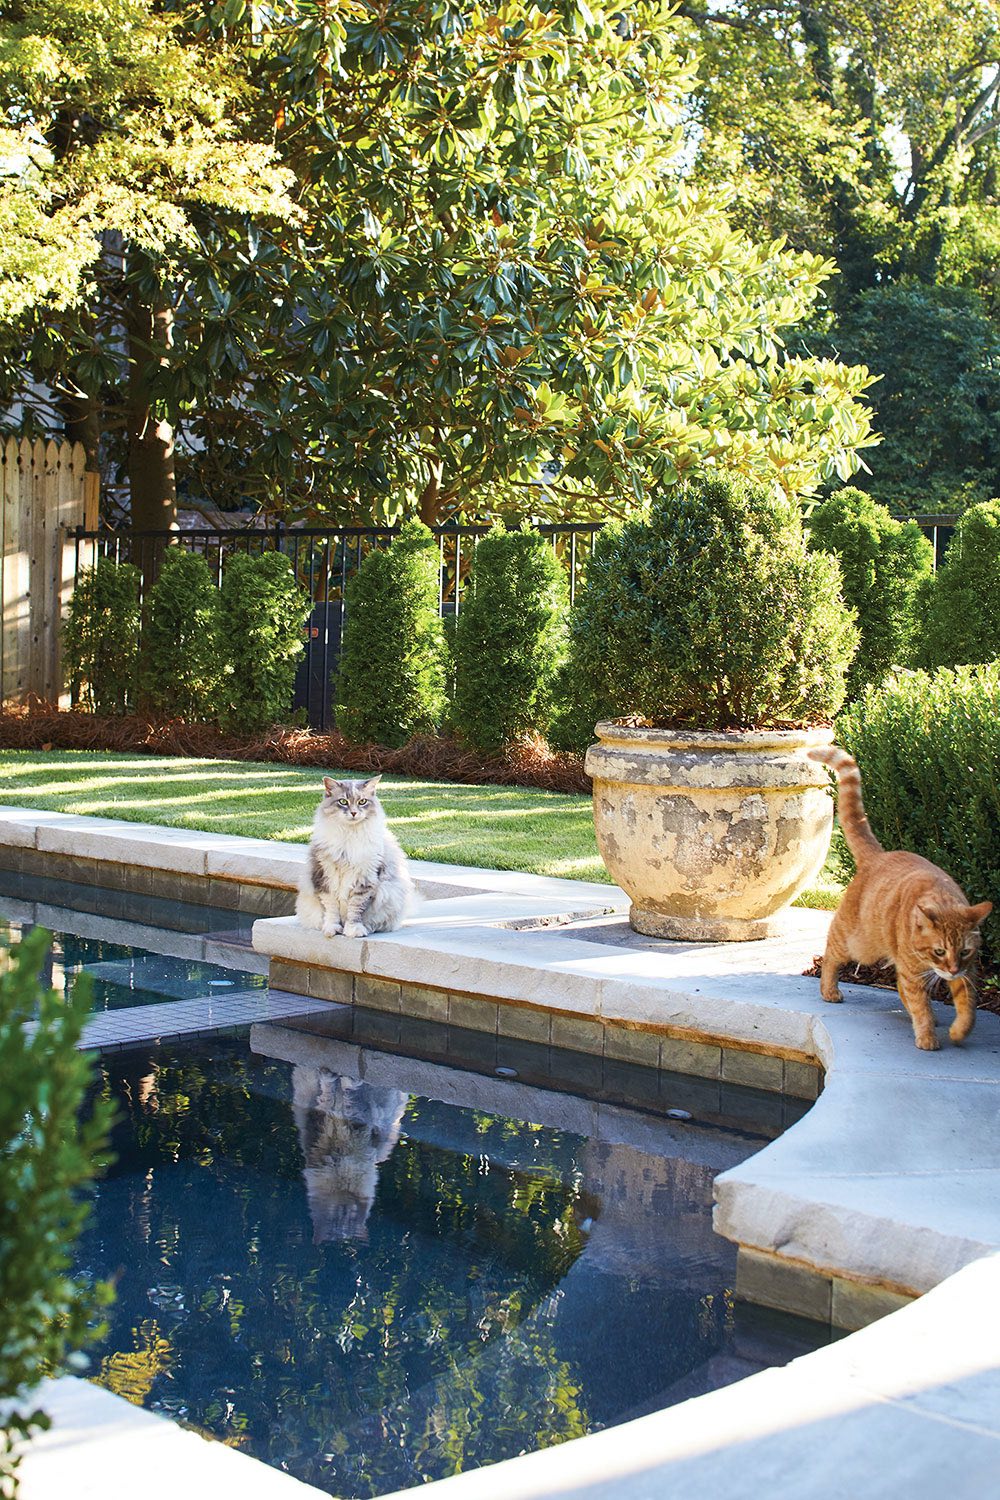 Two cats on pool decking, large pots of boxwood around pool